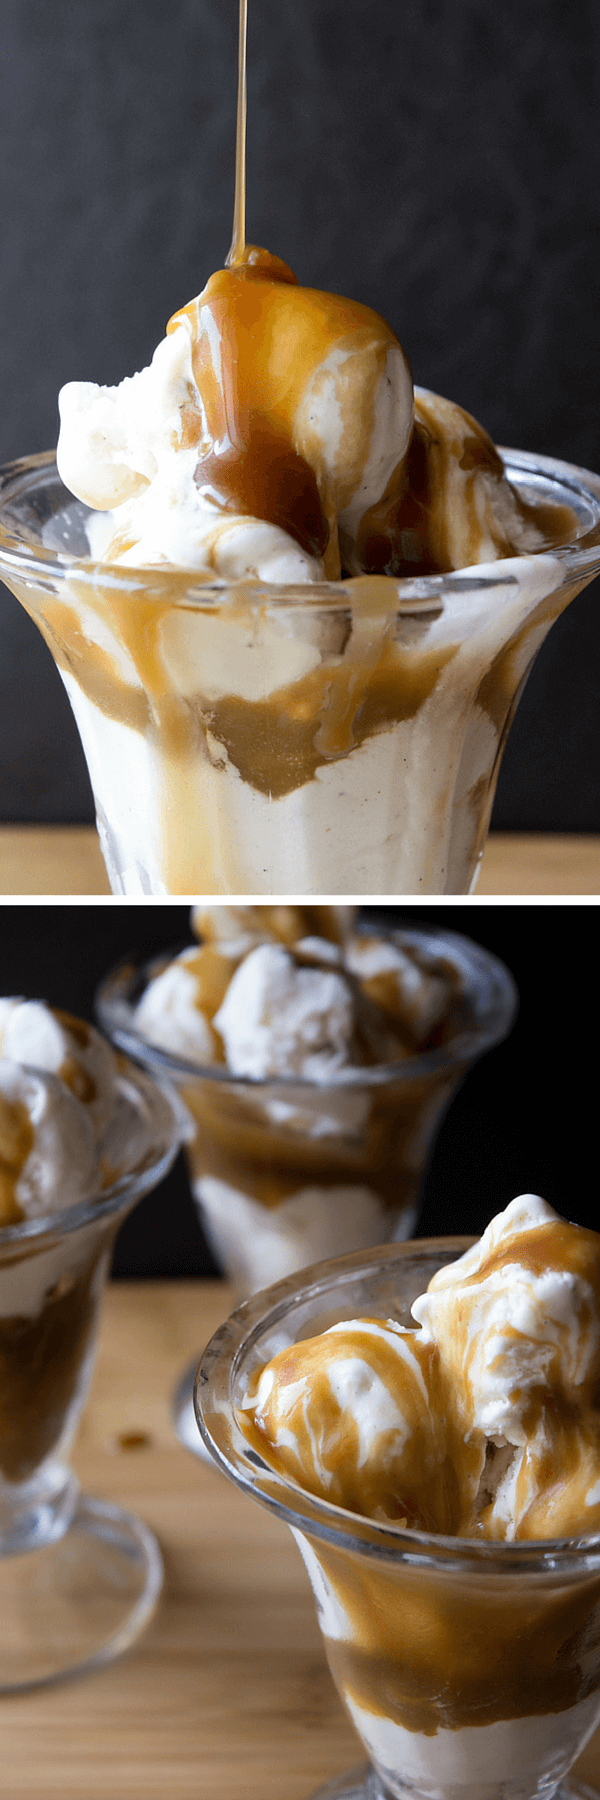 Butterscotch Sundae Sauce. Make your own homemade Butterscotch with this super easy recipe. Only 5 simple ingredients and no candy thermometer required. www.justsotasty.com